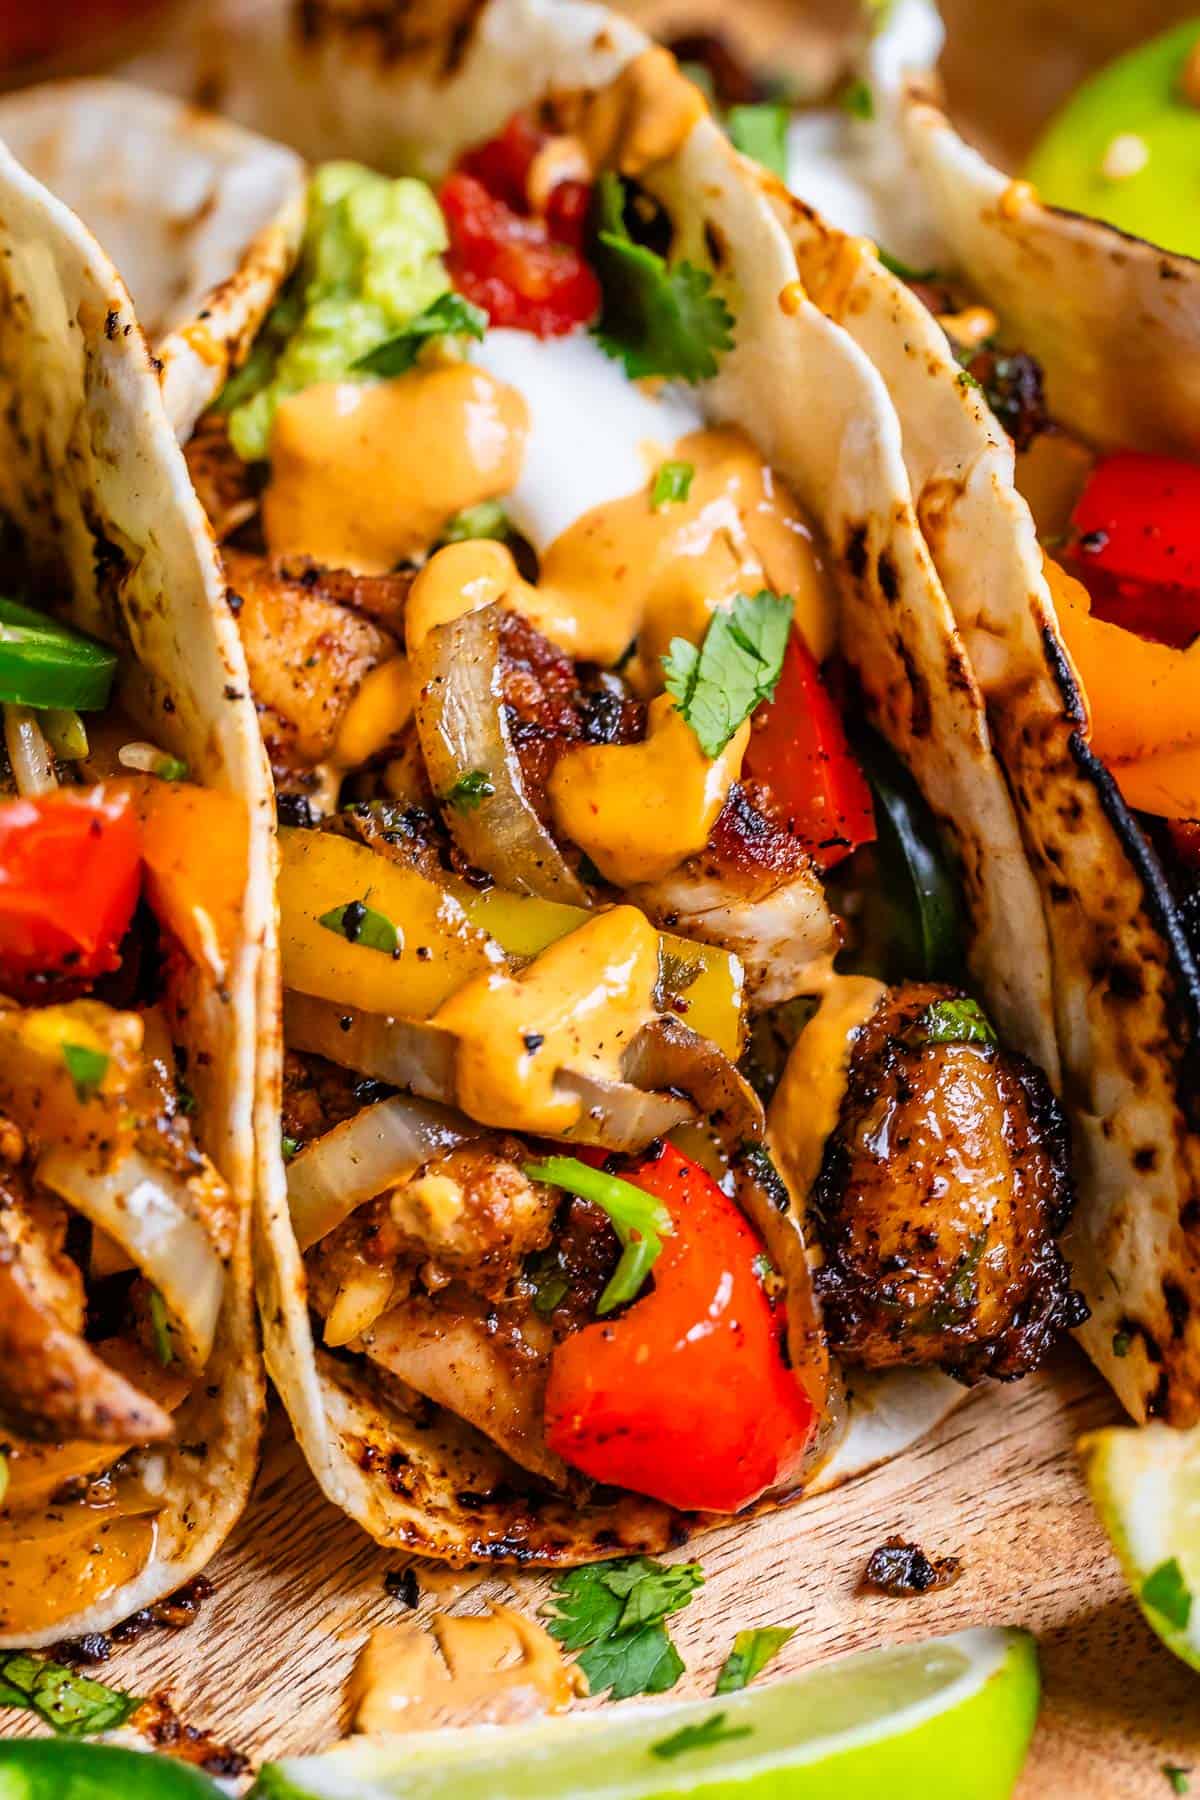 the juiciest chicken fajitas in a warm flour tortilla and topped with guacamole and sour cream.